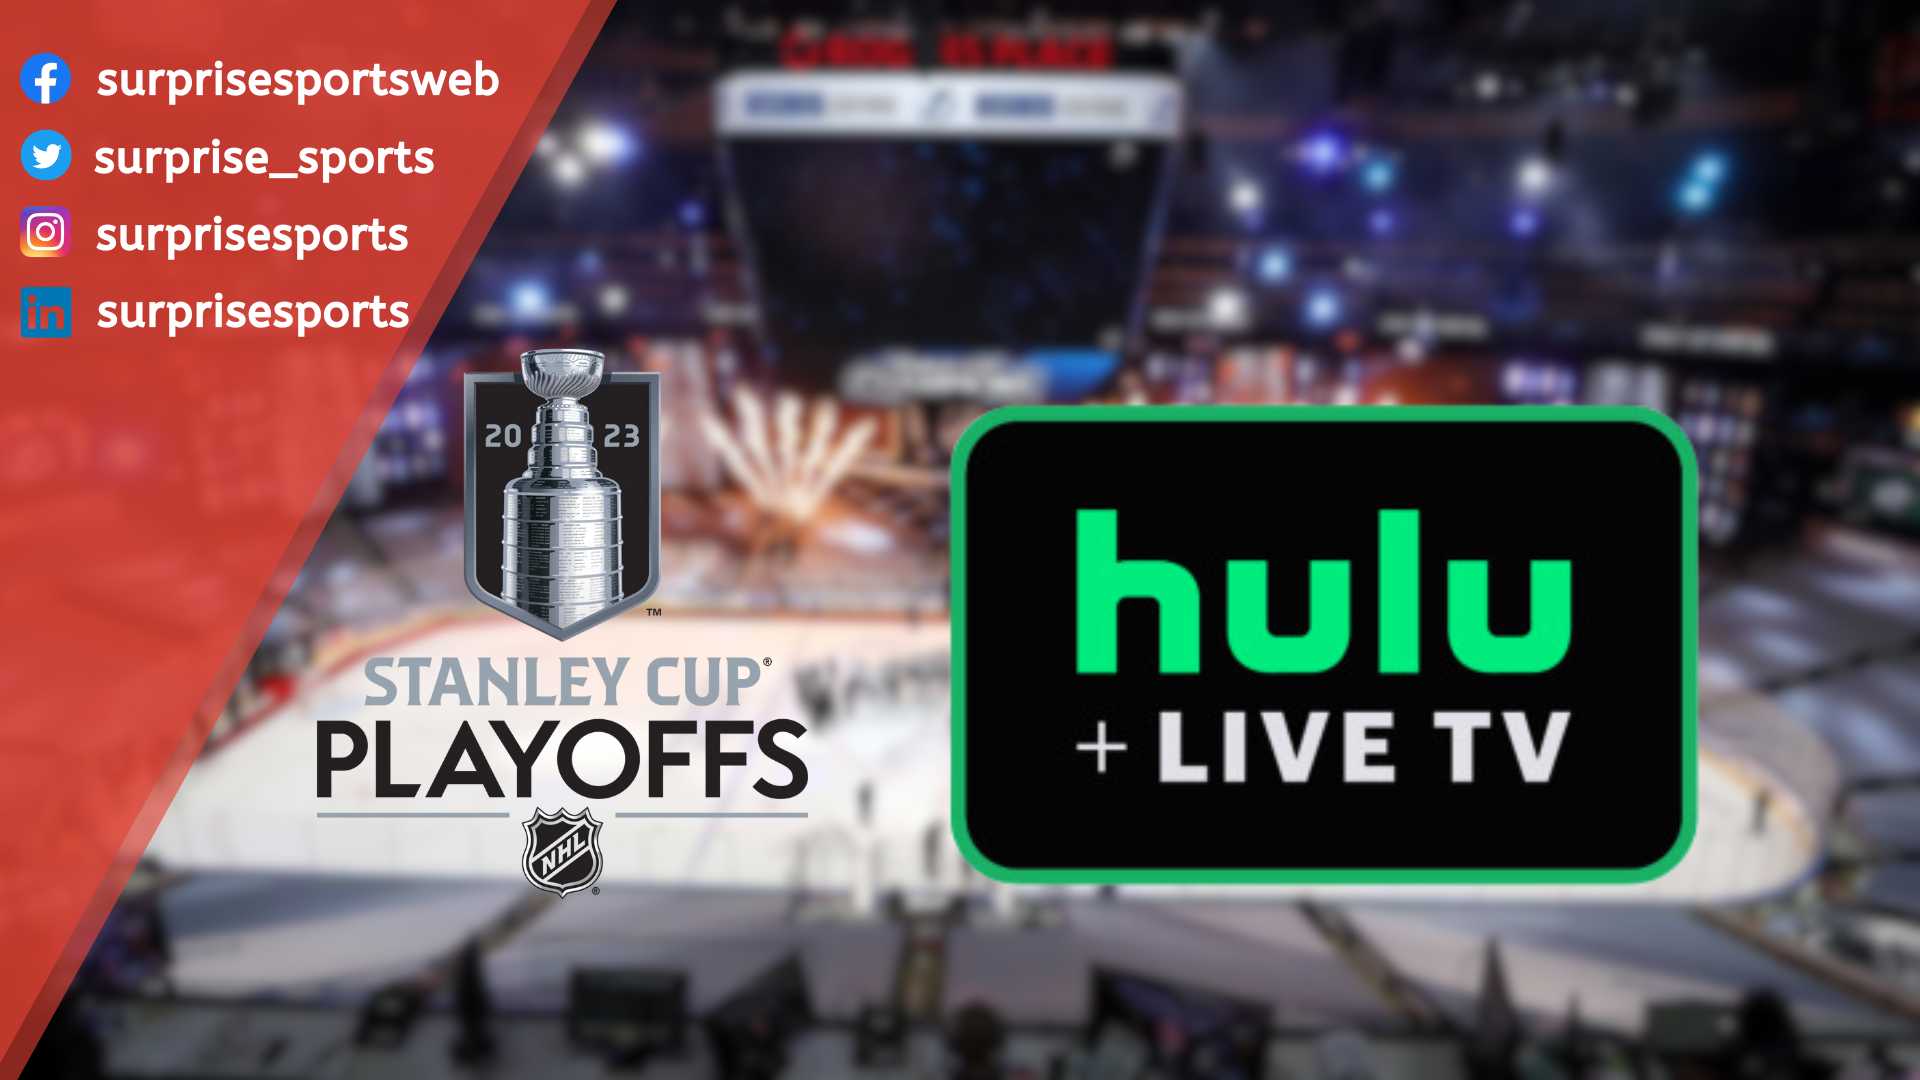 Hulu with Live TV members will be able to watch the Stanley Cup Final